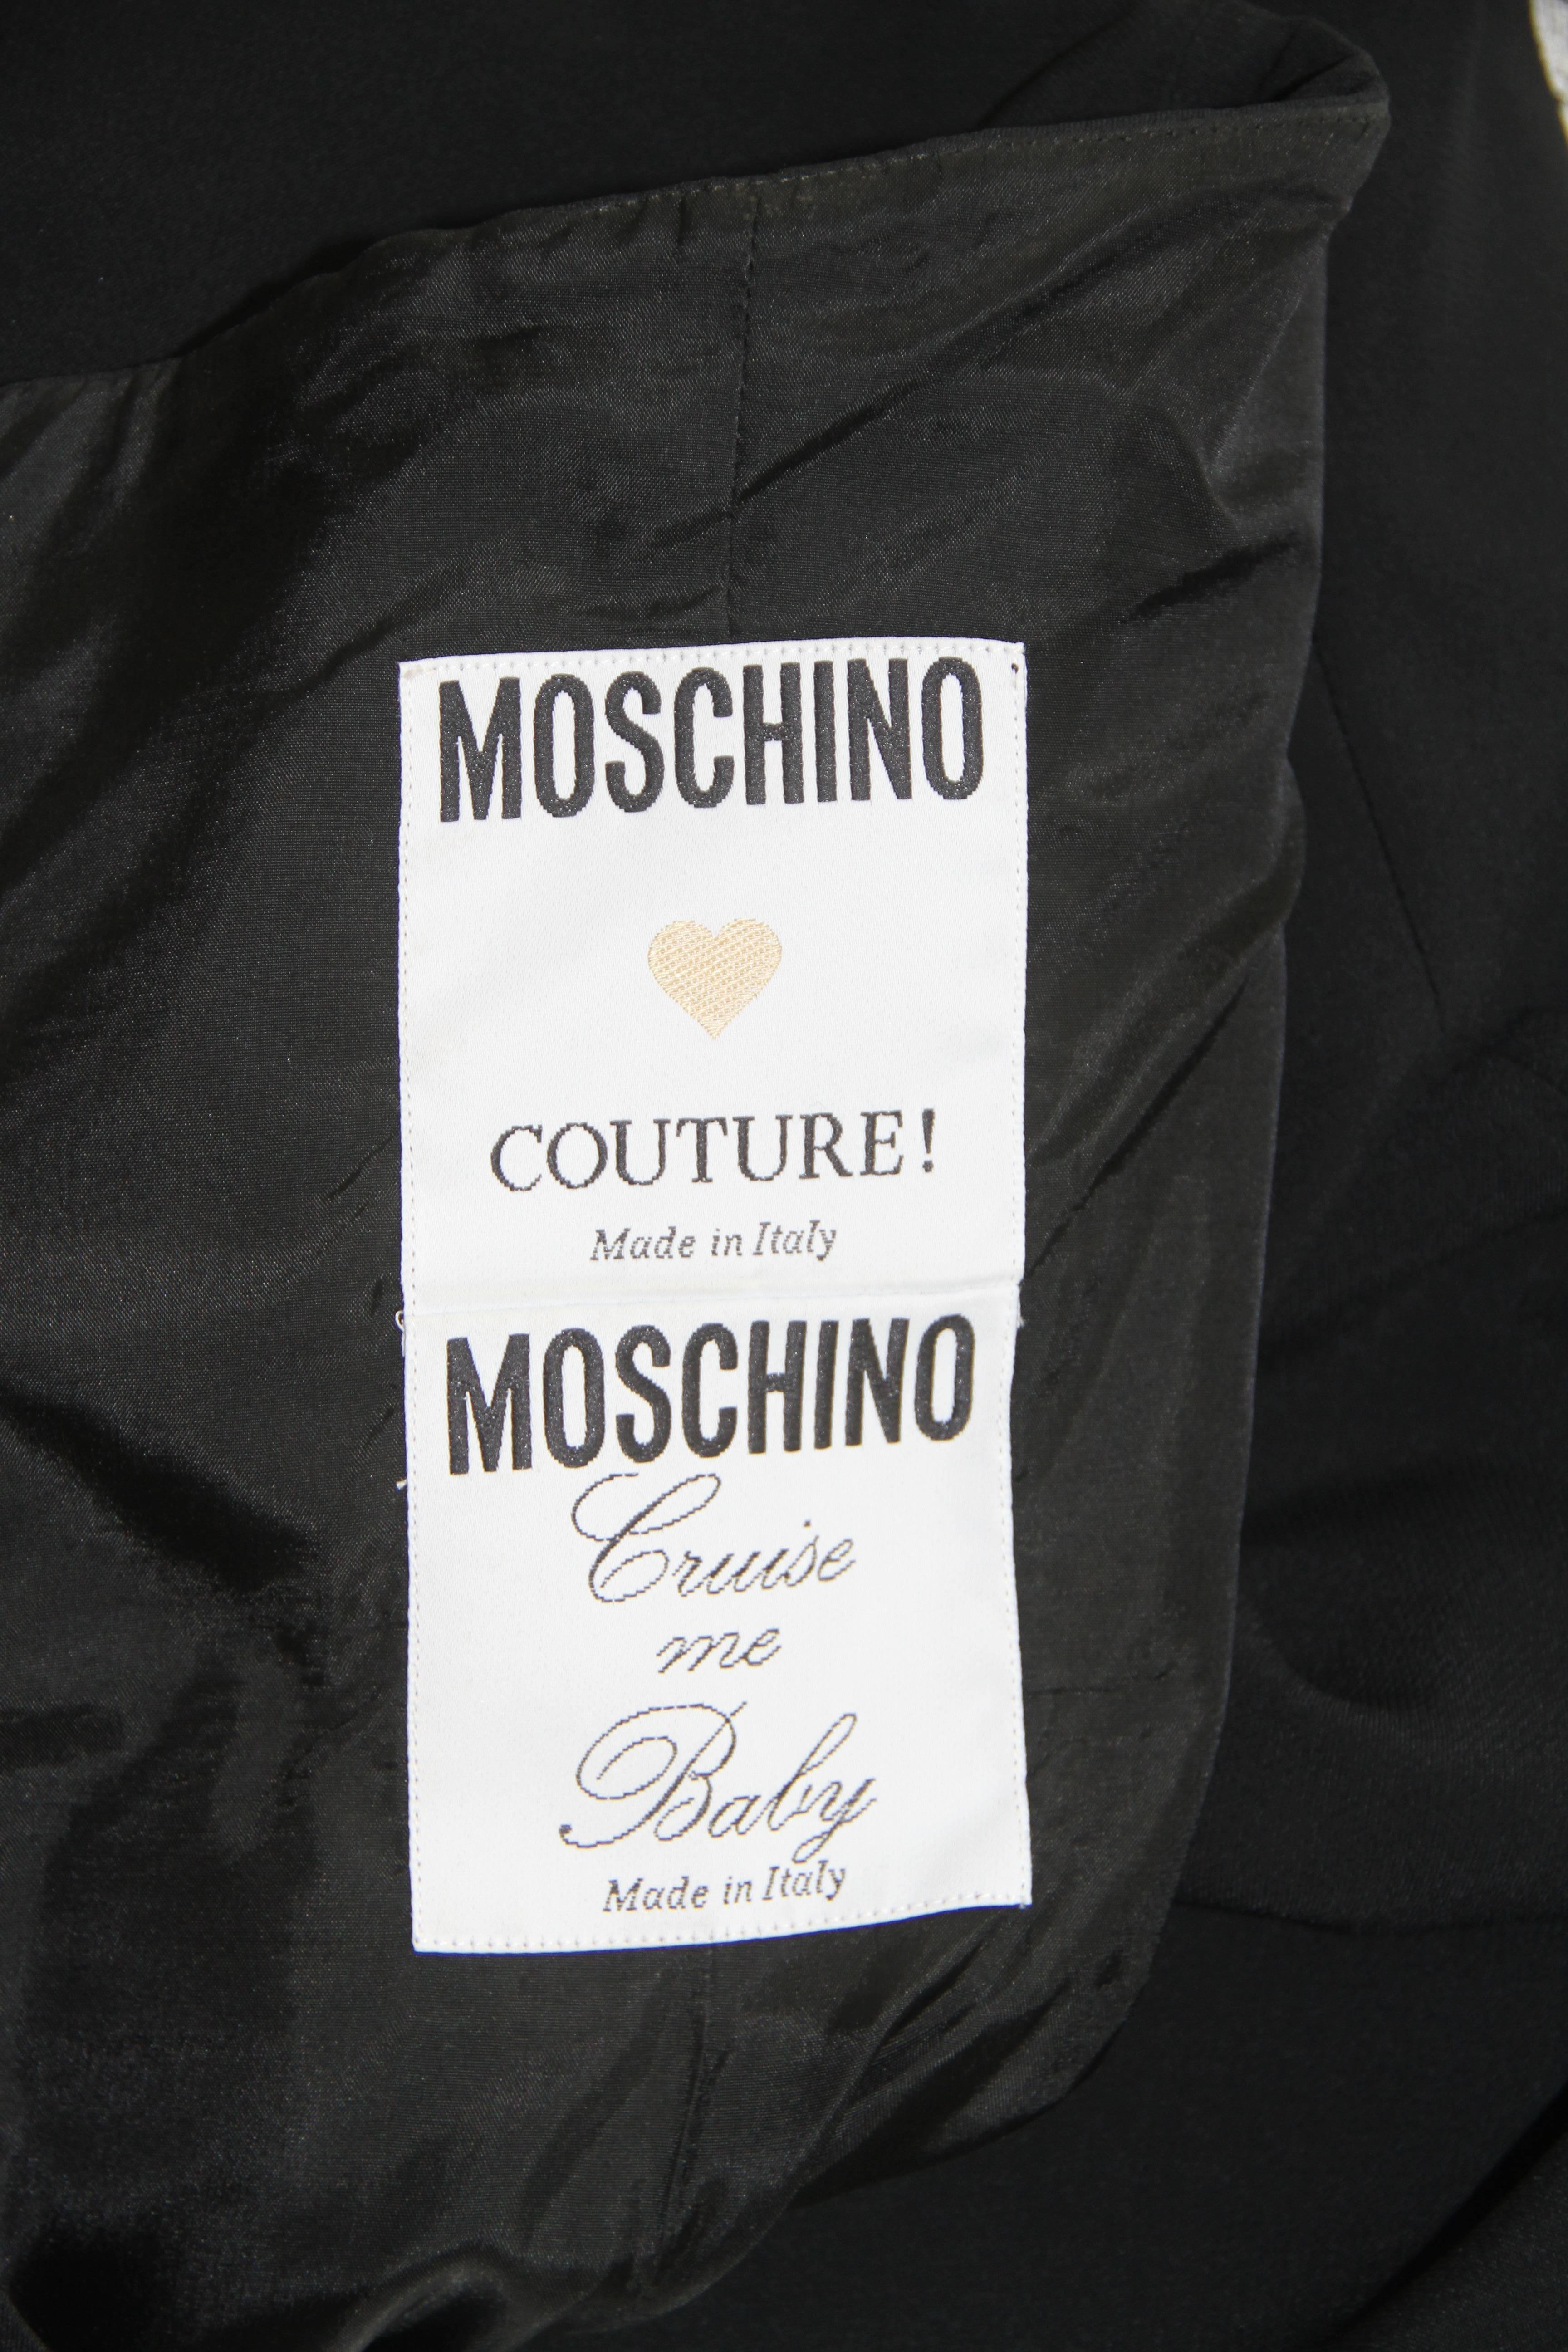 Moschino Couture Cruise Me Baby black silk blend wrap cocktail dress from the early 1990's.

Marked an Italian size 42.

Manufacturer - Aeffe S.p.a.